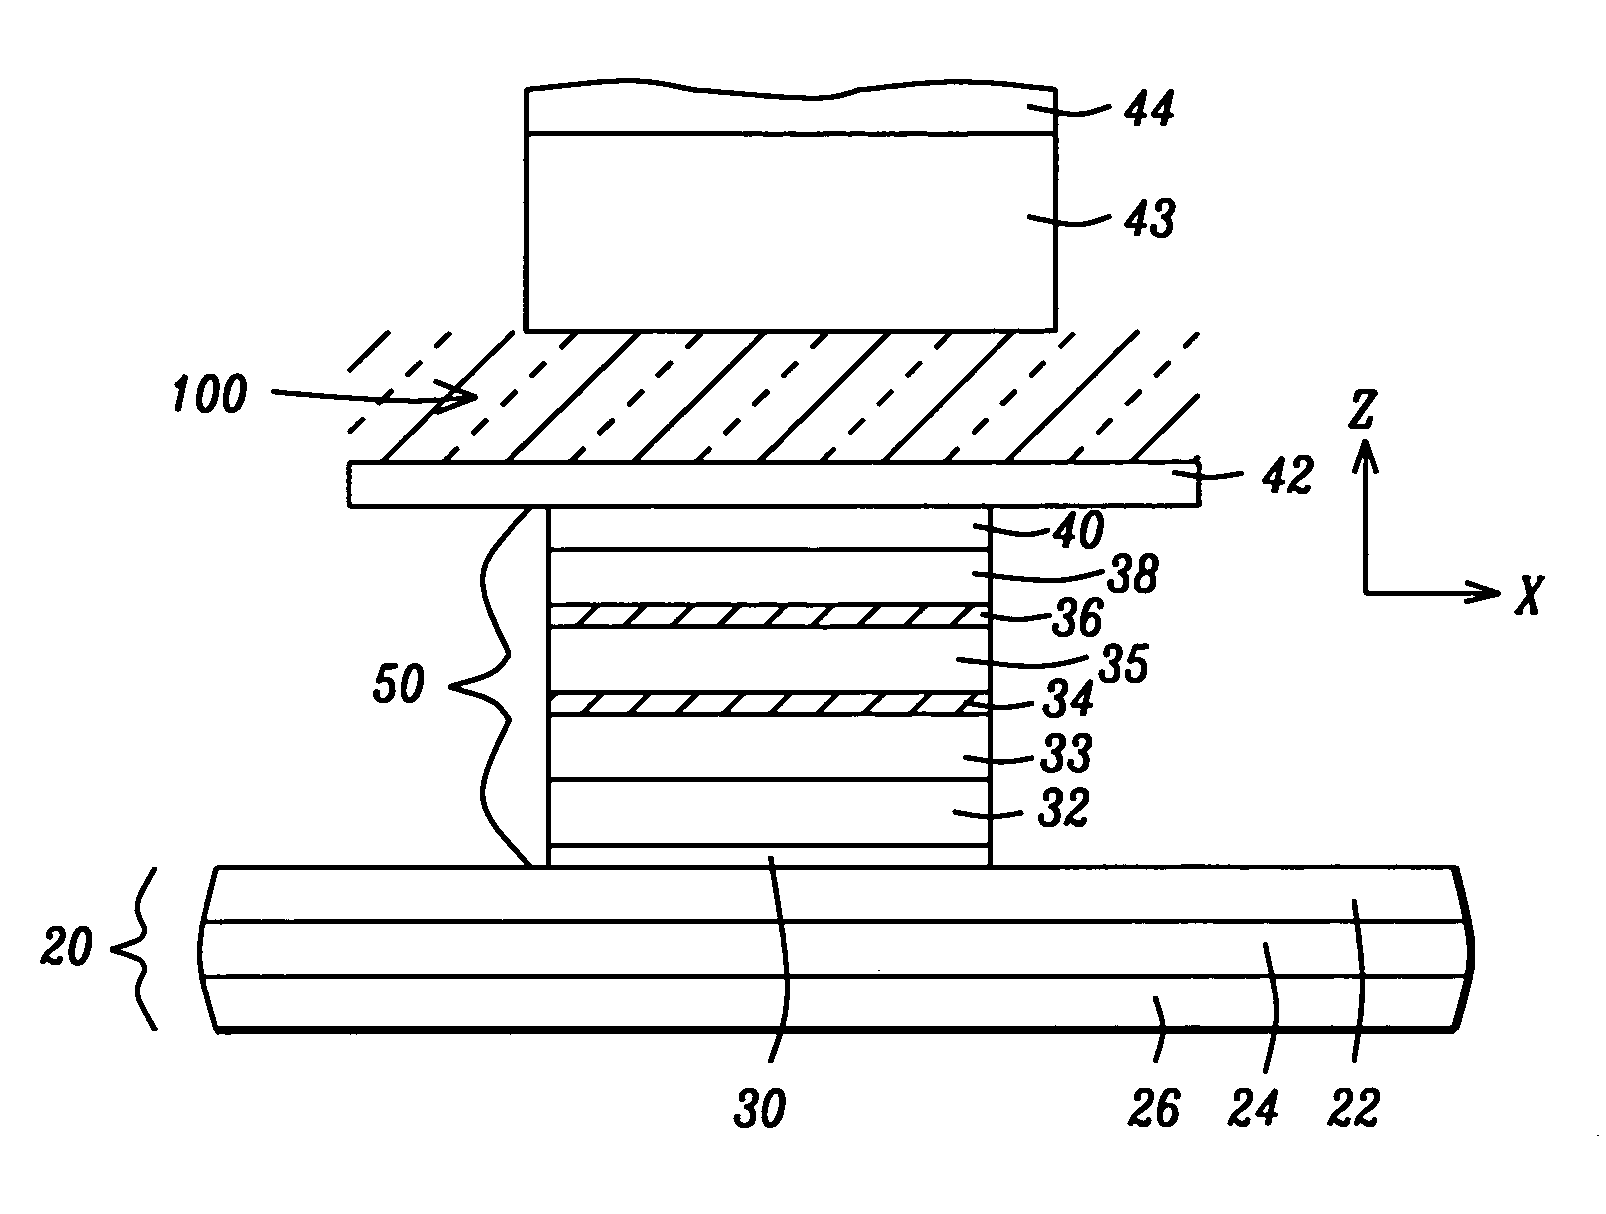 Magnetic random access memory array with free layer locking mechanism